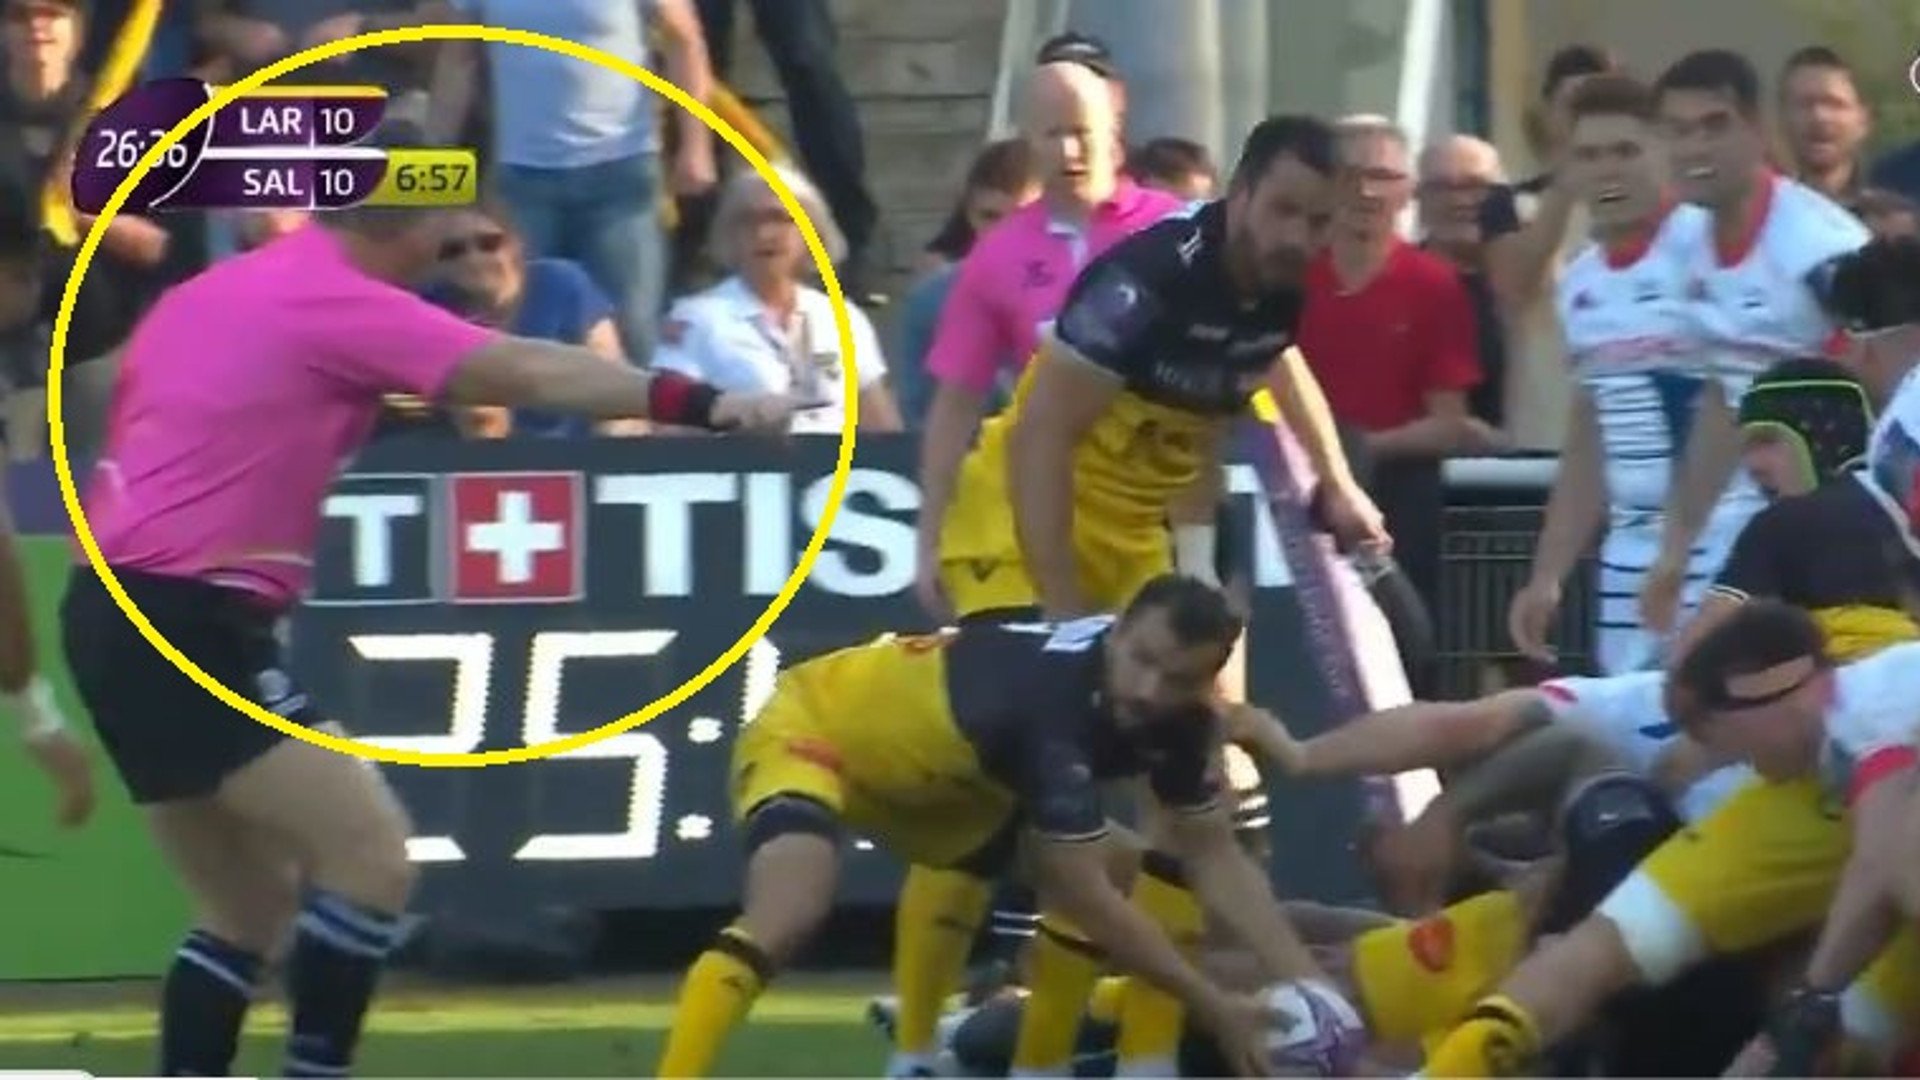 FOOTAGE: Nigel Owens gives assistant refs a much needed pep talk as Cup match explodes